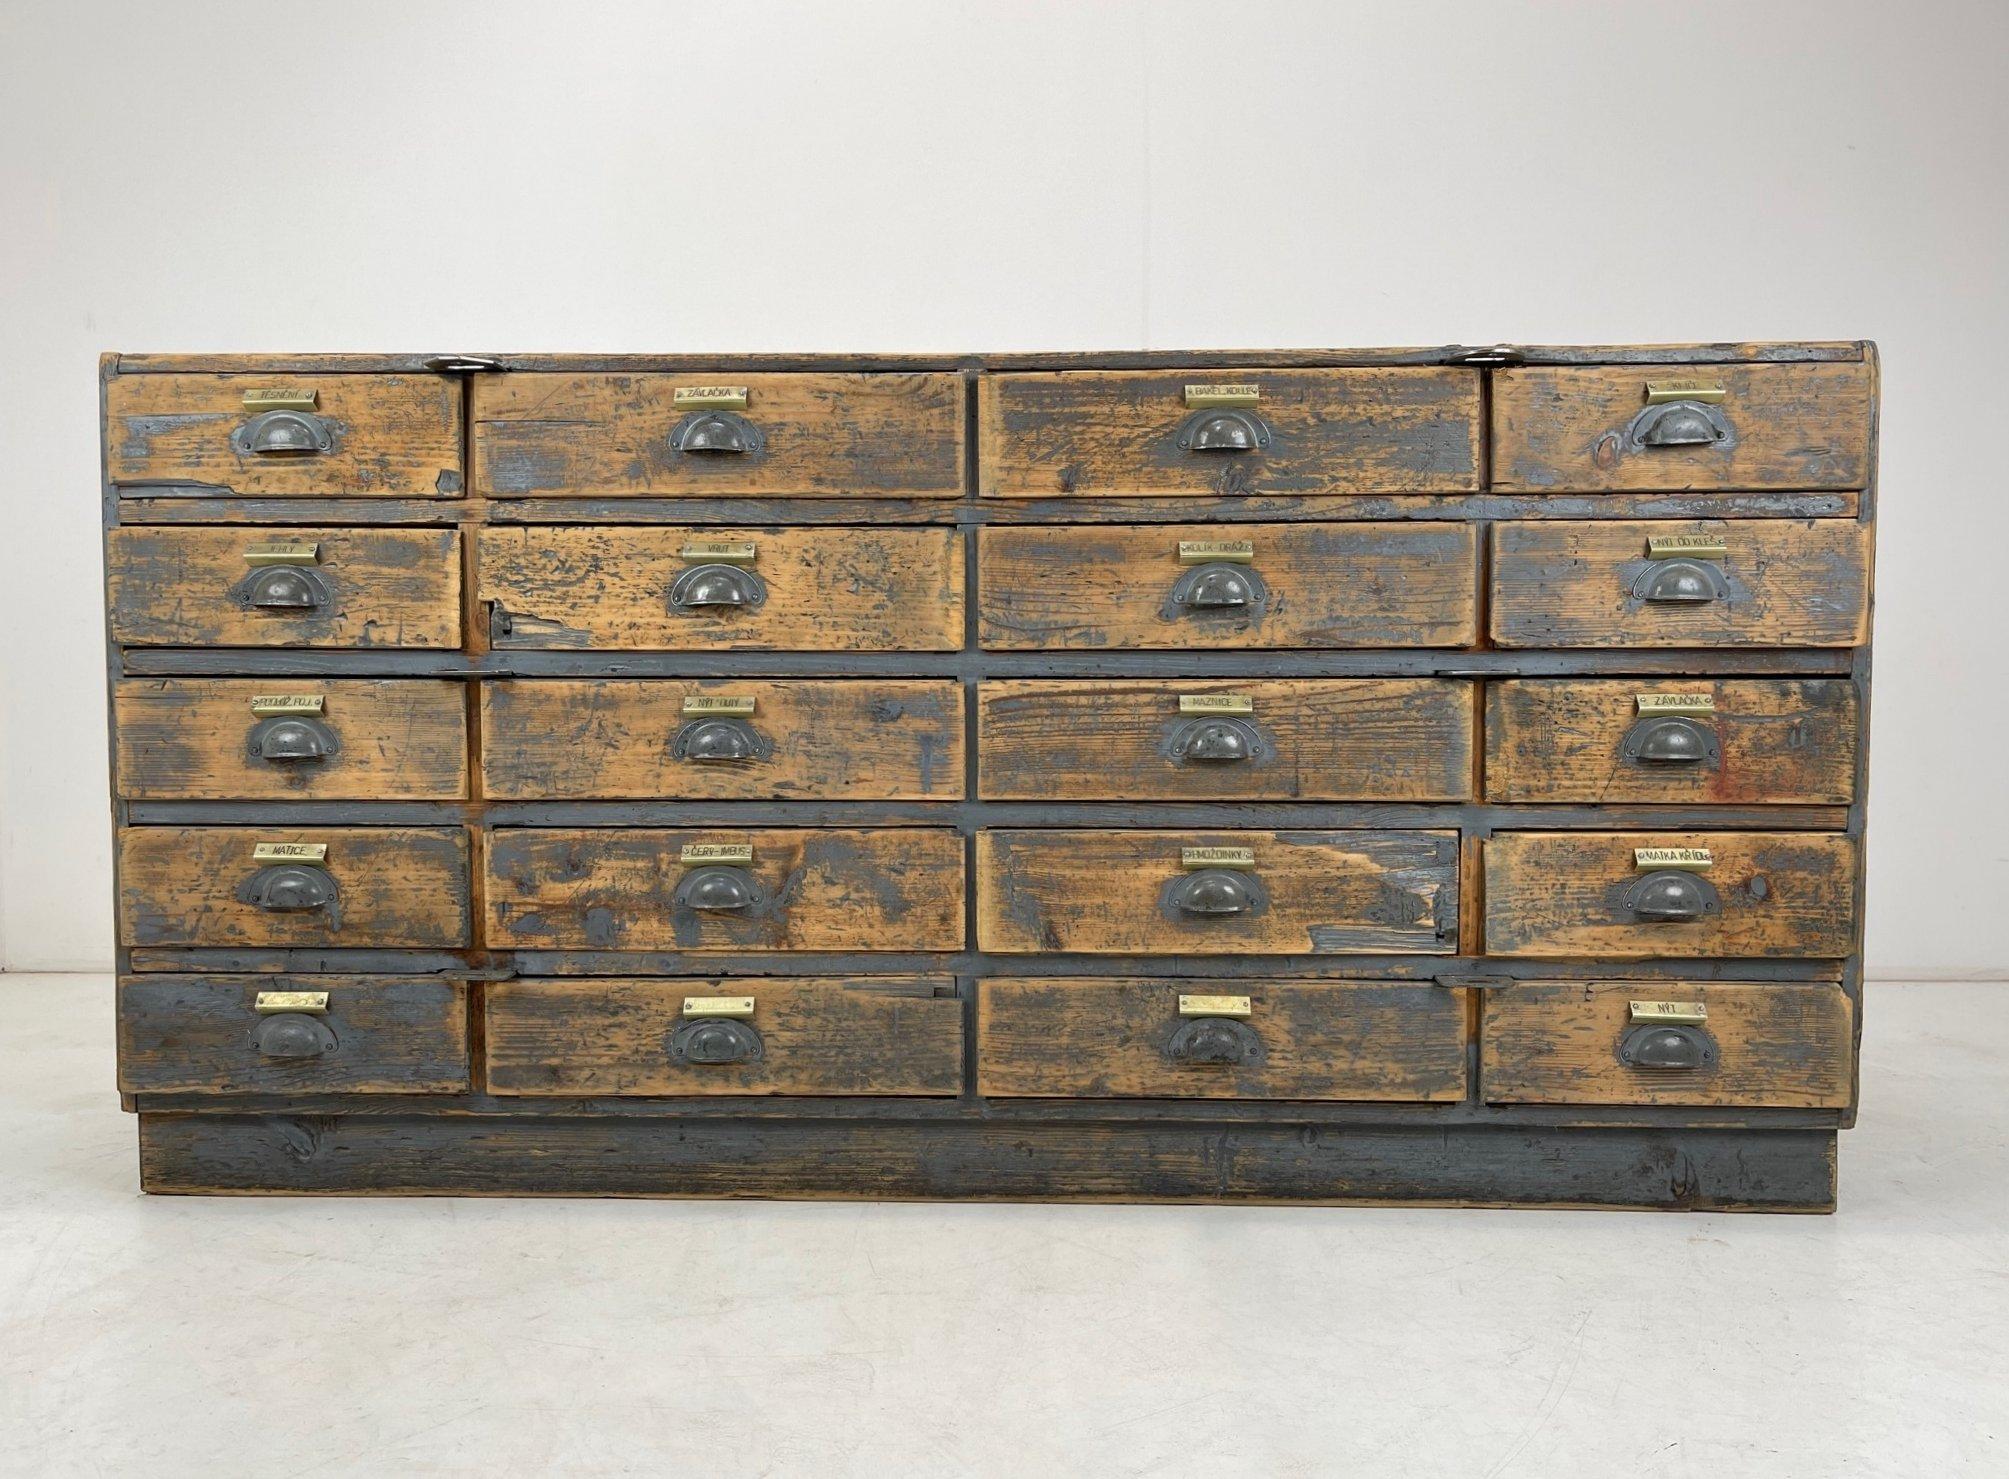 Amazing industrial wooden cabinet with 20 drawers marked with original metal labels. It was rescued from an old, screw factory in former Czechoslovakia.
Original patina, completely cleaned, sanded and waxed. It will elevate any interior and make it